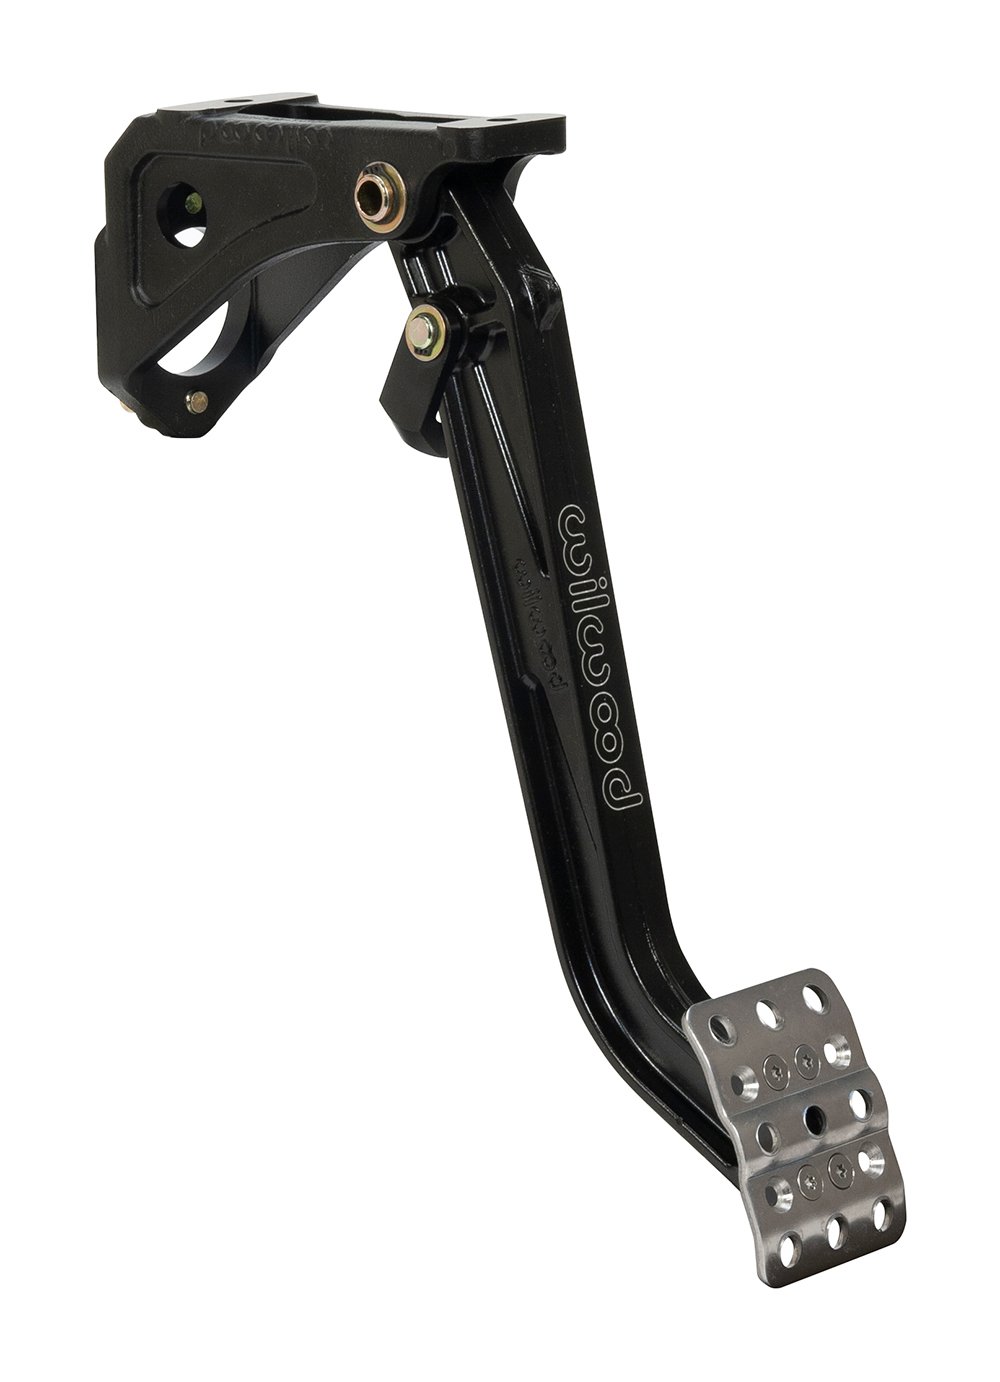 Brake or Clutch Pedal Pedal Assembly Mount Location: Swing